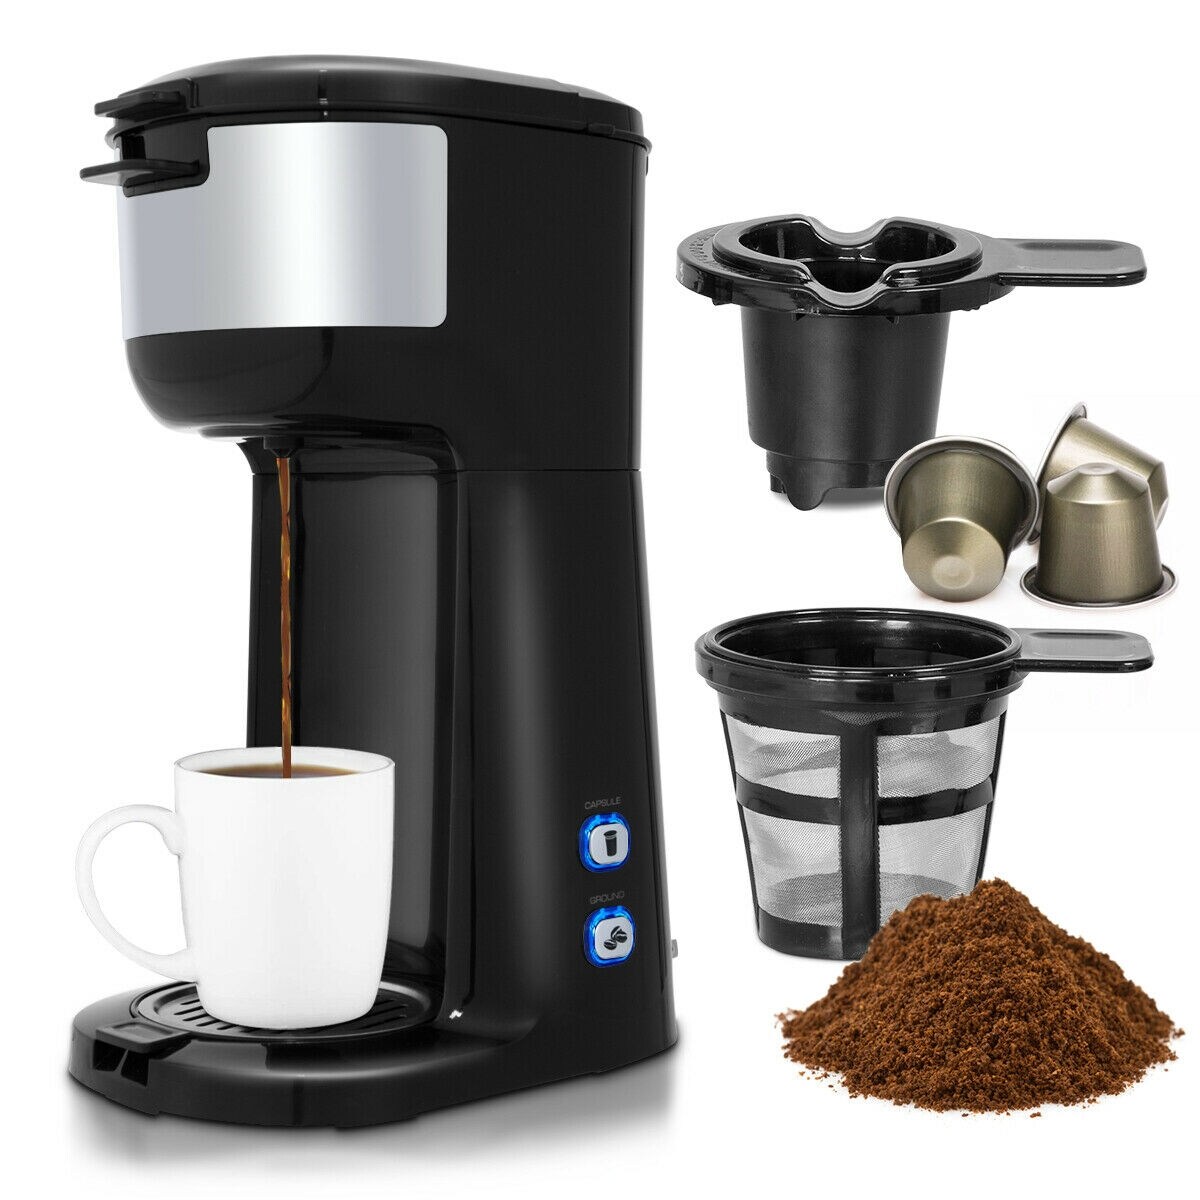  BELLA Single Serve Coffee Maker, Dual Brew, K-cup Compatible -  Ground Coffee Brewer with Removable Water Tank & Adjustable Drip Tray,  Perfect for Travel Mug: Home & Kitchen